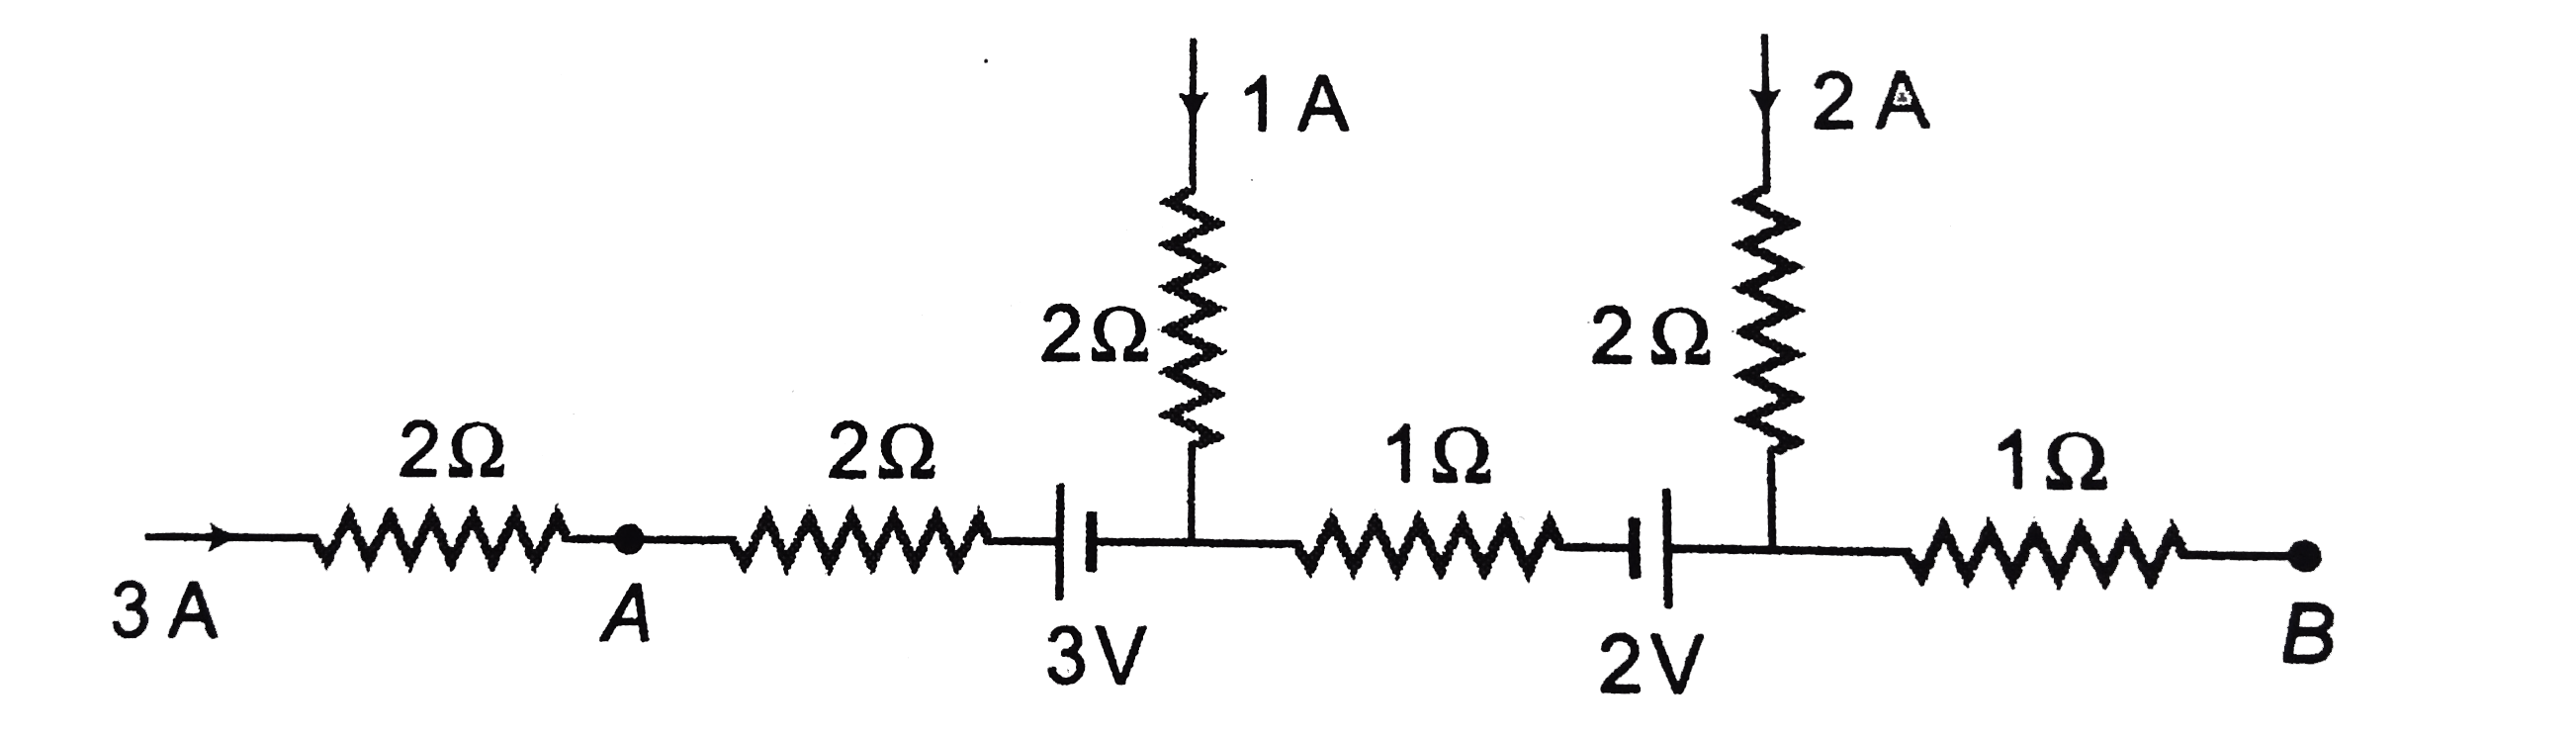 The potential difference between points A and B, in a section of a circuit shown in